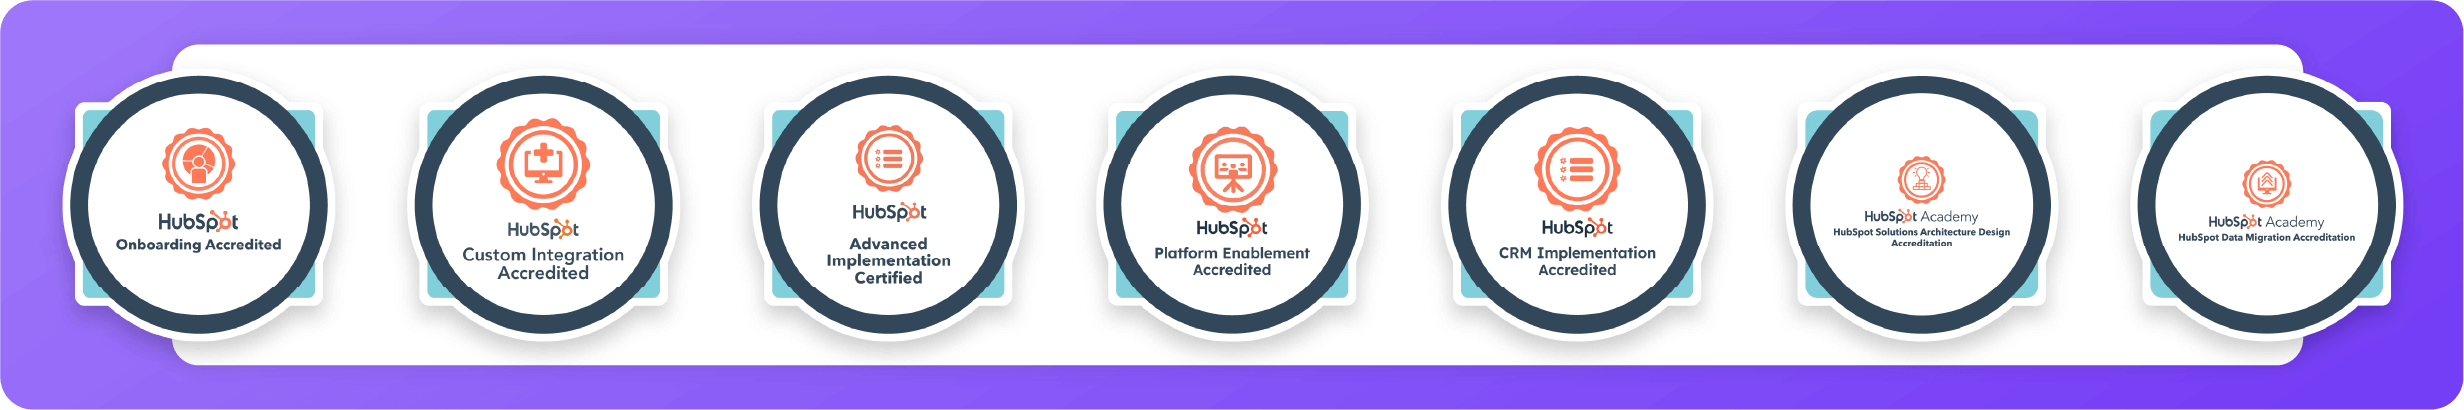 new breed certifications from HubSpot